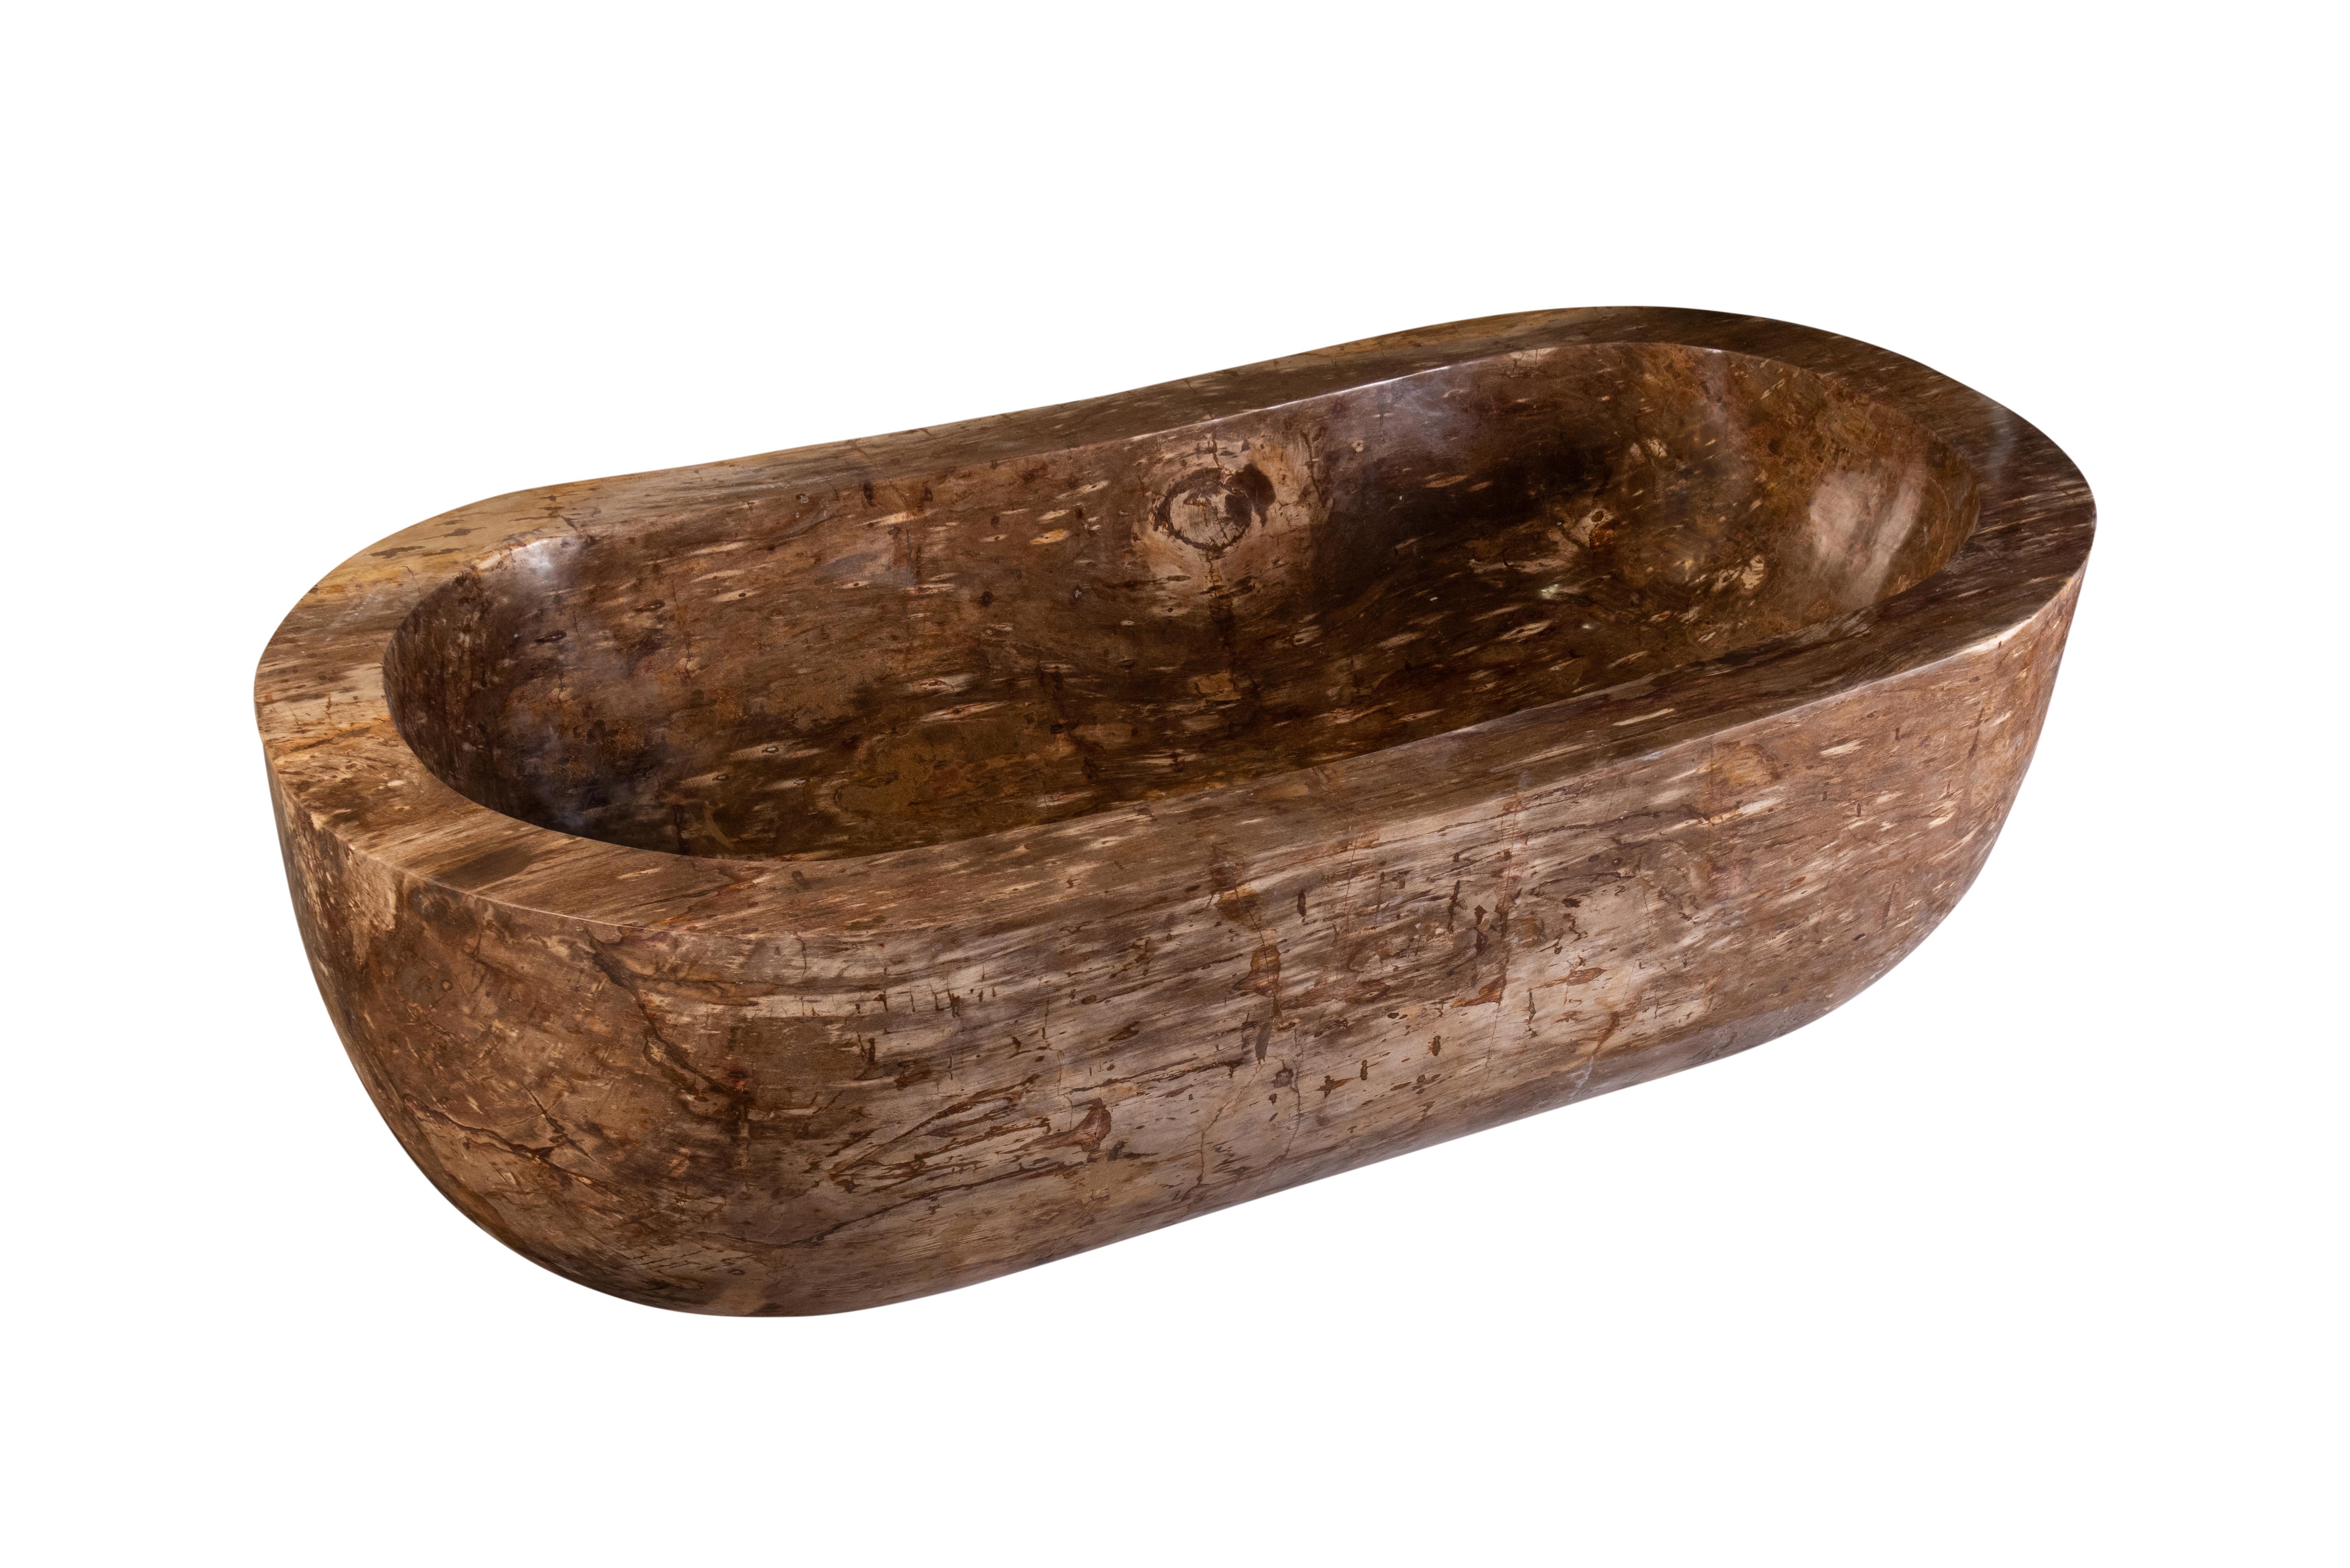 
This petrified wood bath is sculpted from fossilised wood as unique as the tree that it was originally carved from. Trees buried in sediment and protected from decay by oxygen are preserved into stunning original fossils, a 3 Dimensional